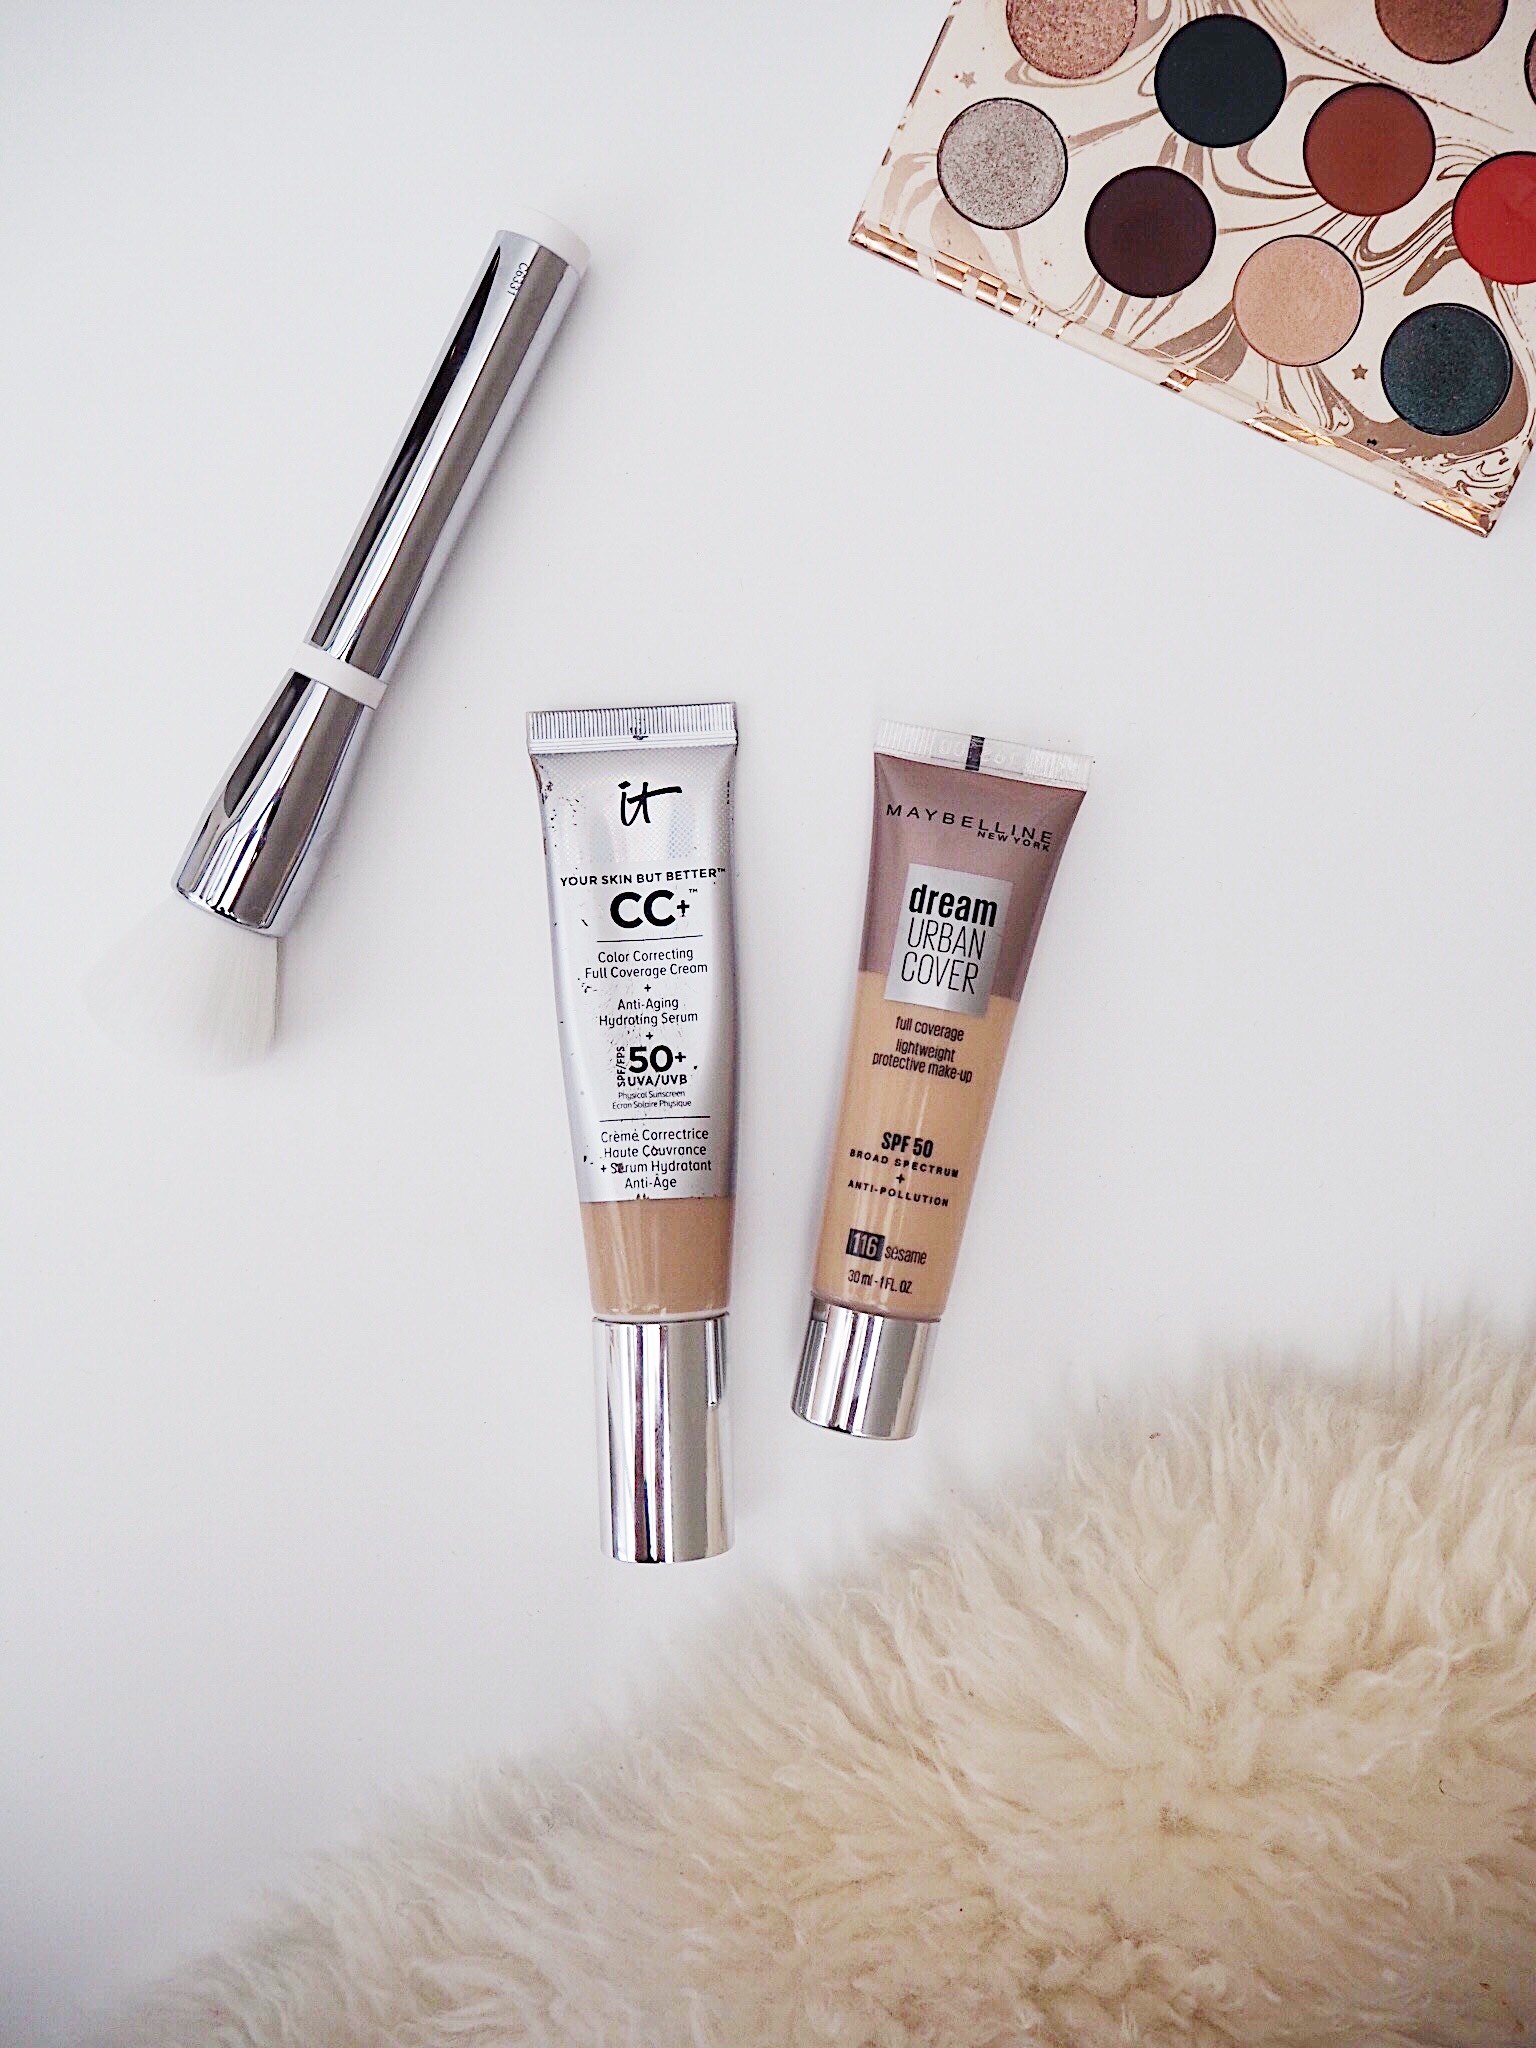 Maybelline Dream Urban Cover Foundation Review 